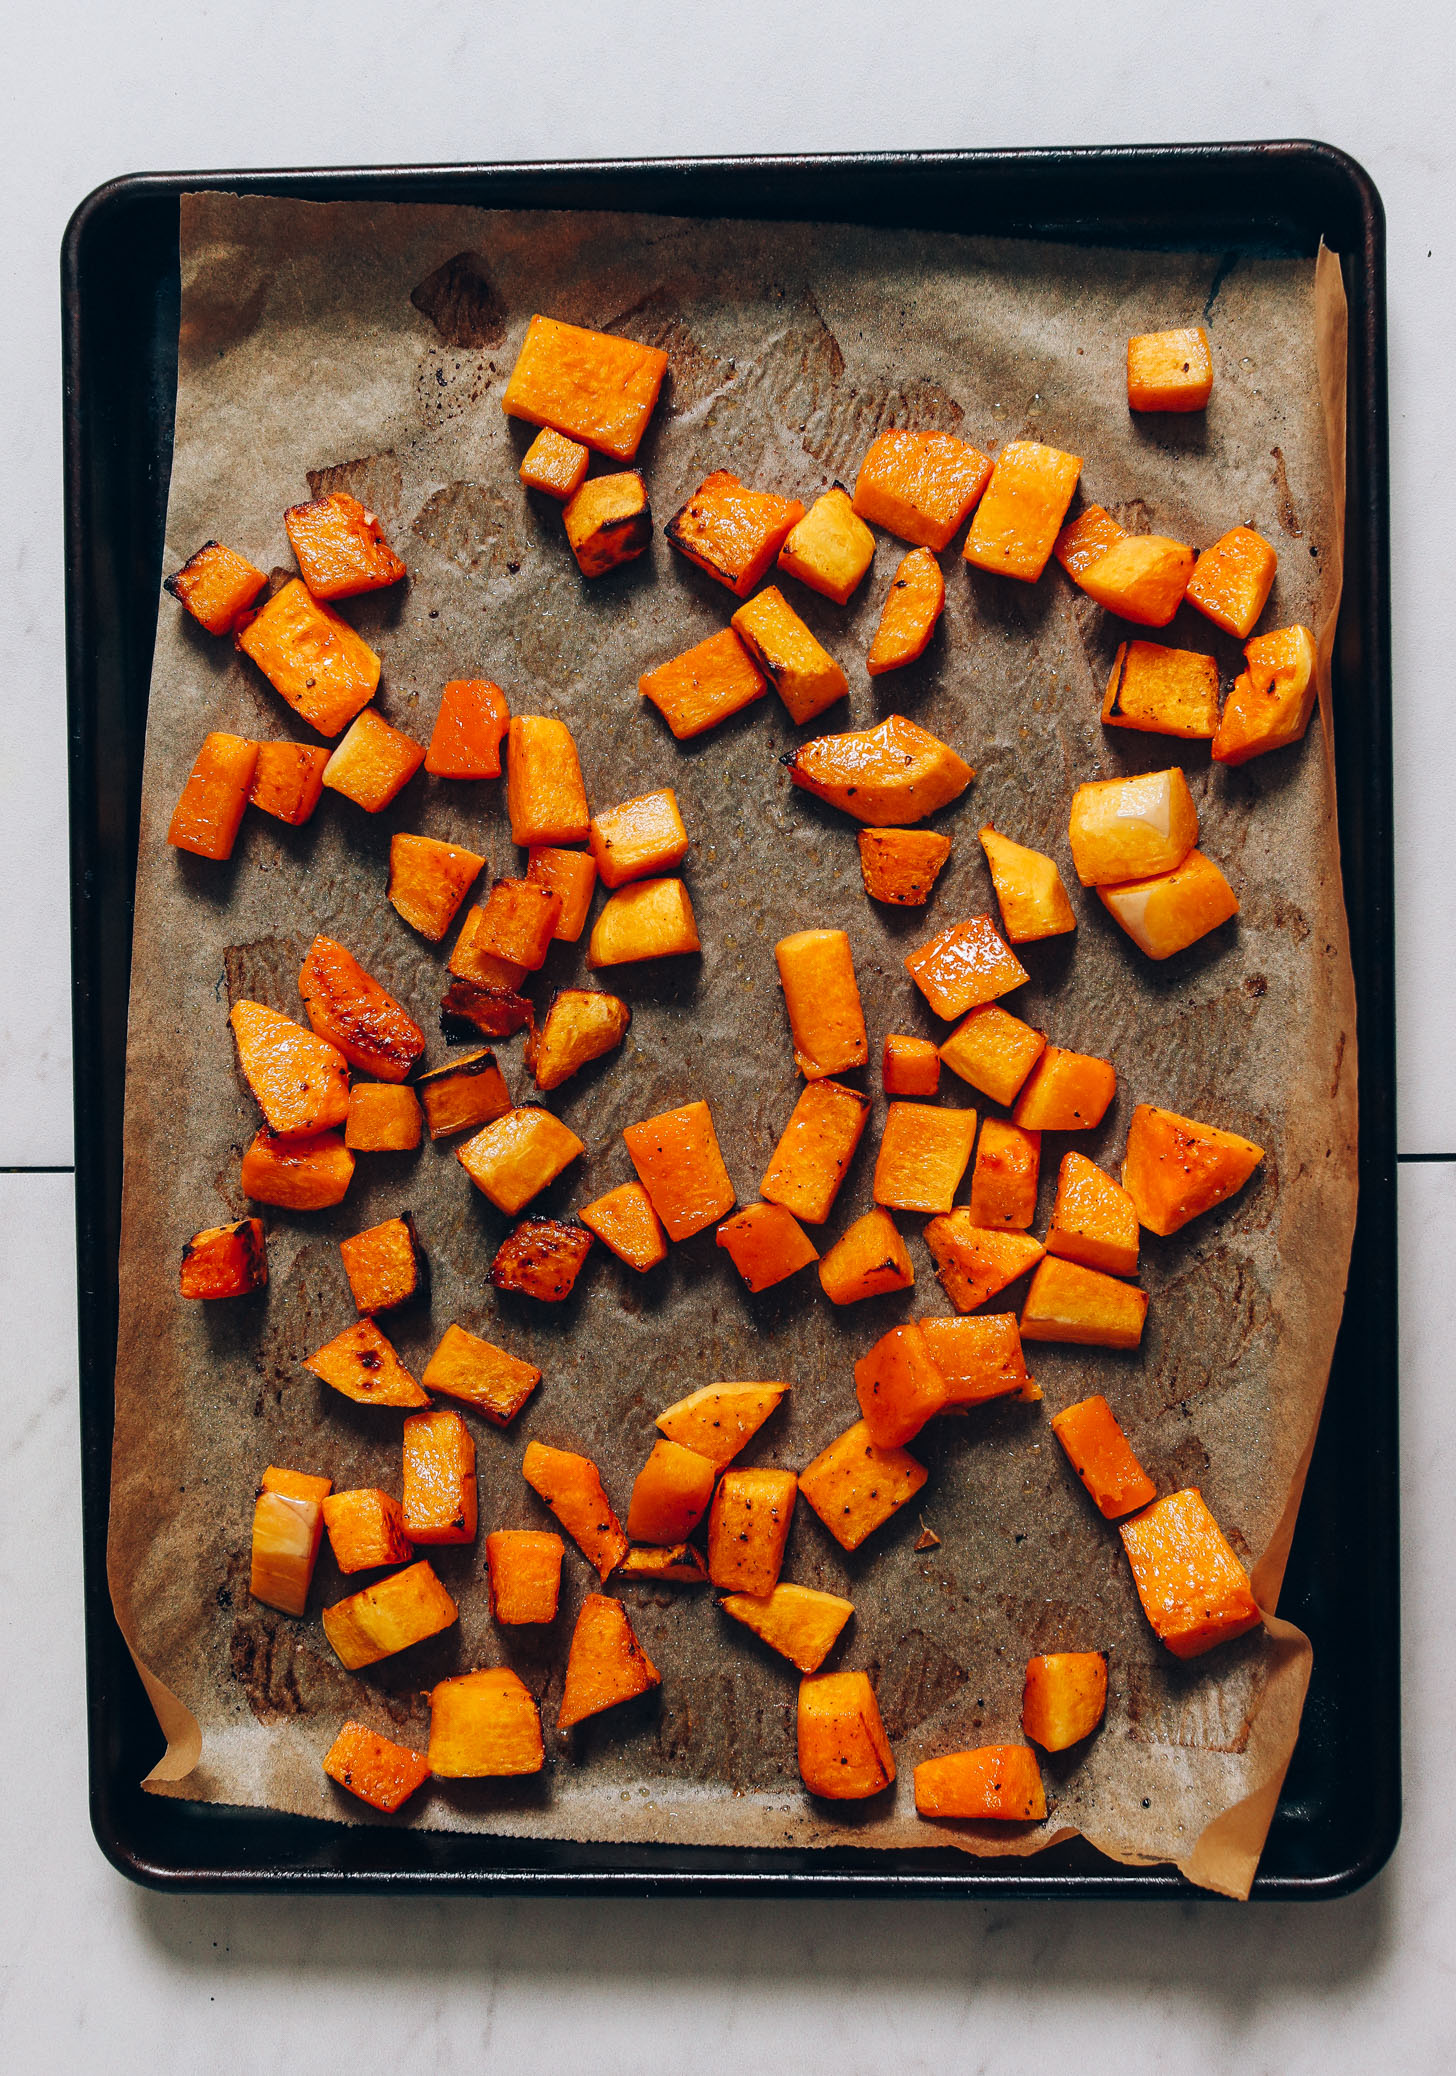 Perfectly roasted butternut squash on a baking sheet